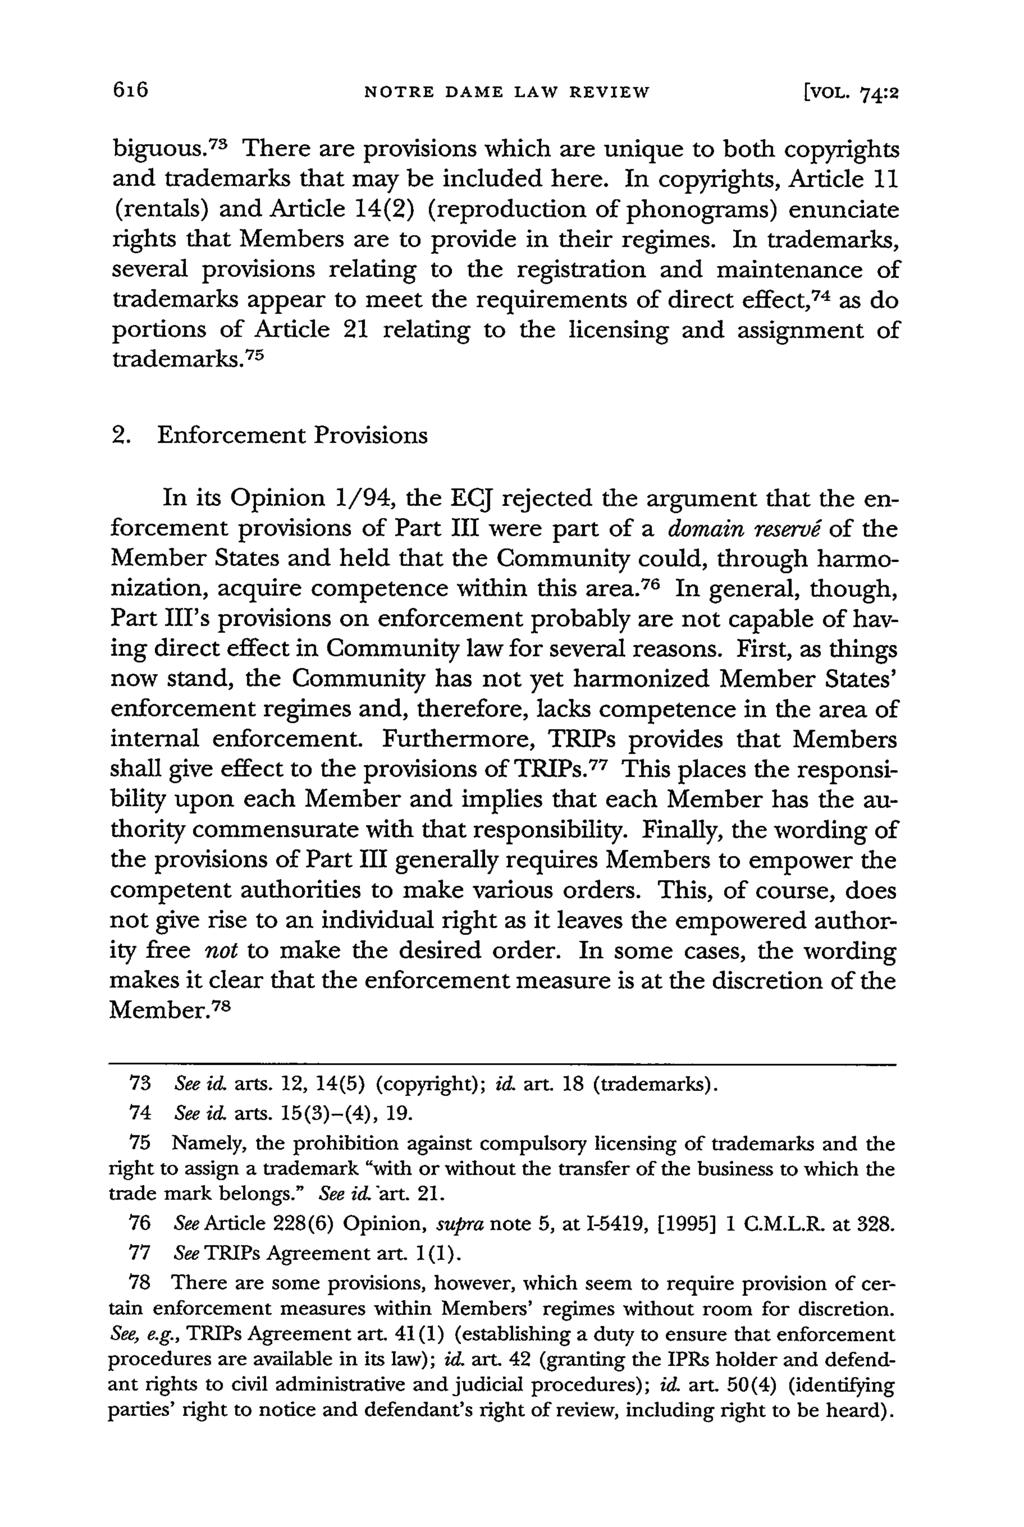 NOTRE DAME LAW REVIEW [VOL. 74:2 biguous. 73 There are provisions which are unique to both copyrights and trademarks that may be included here.